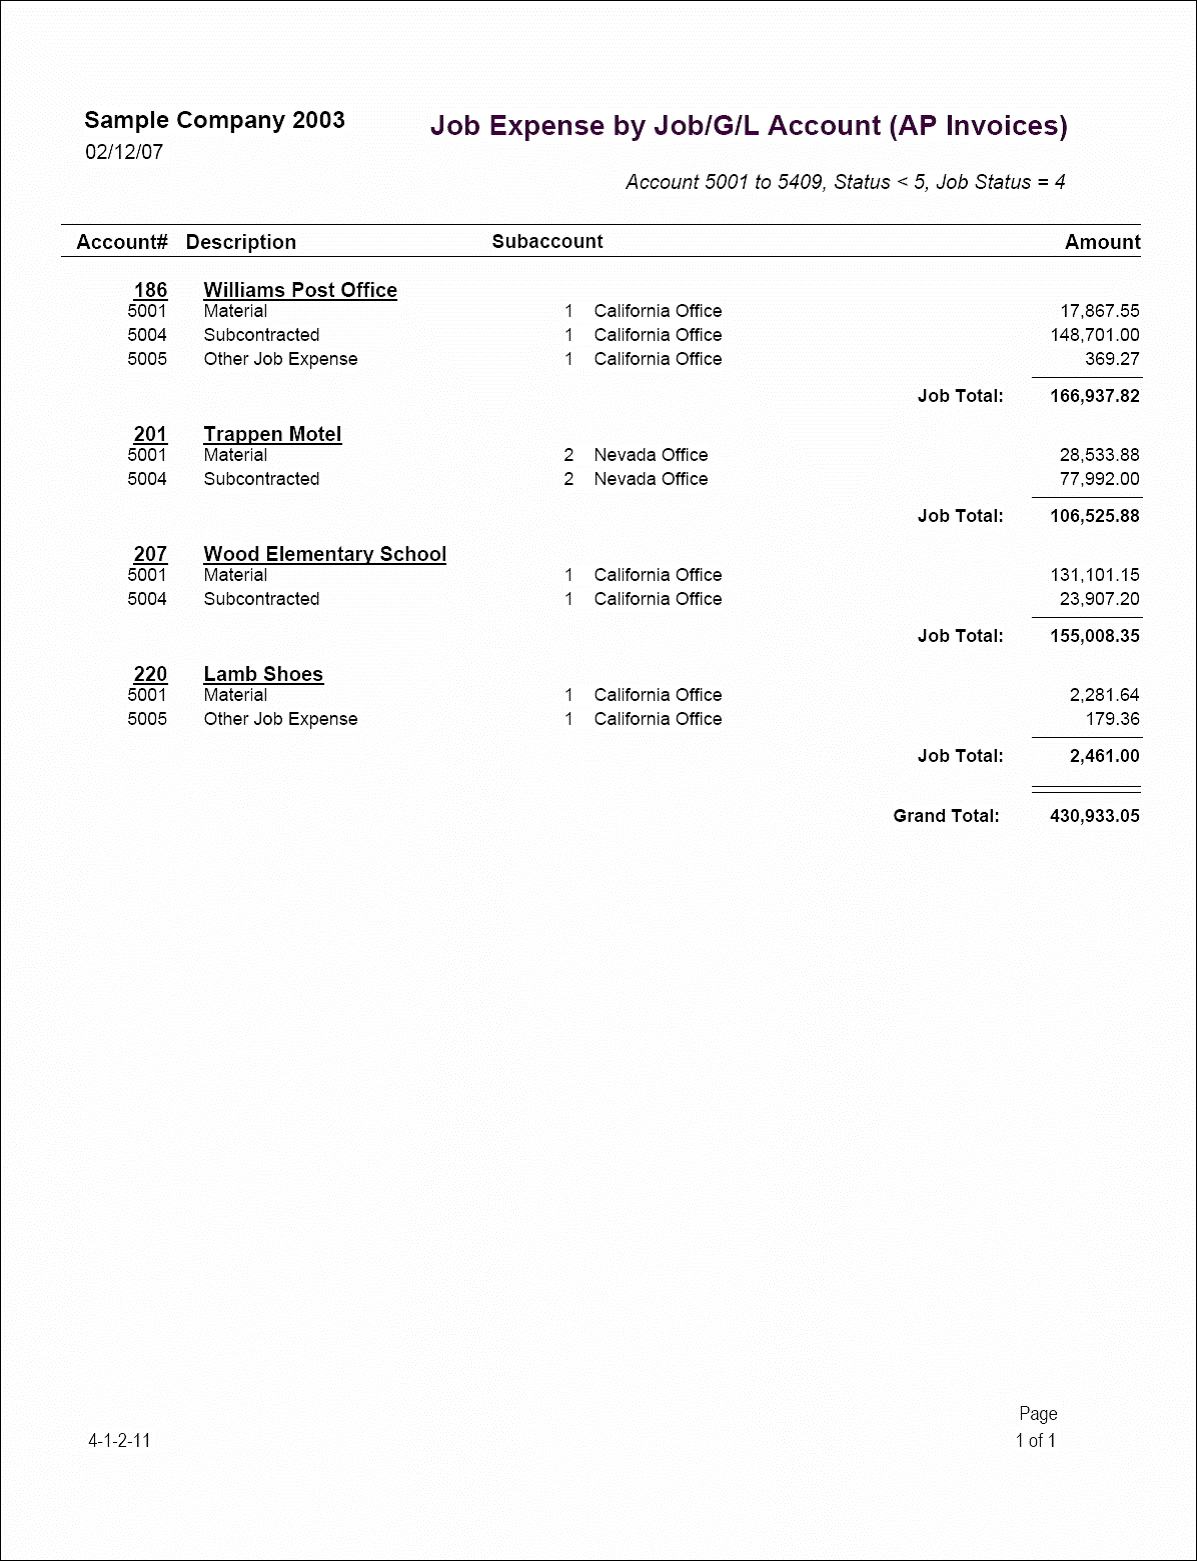 04-01-02-11 Job Expense by Job / GL Acct  (from AP Invoices) 